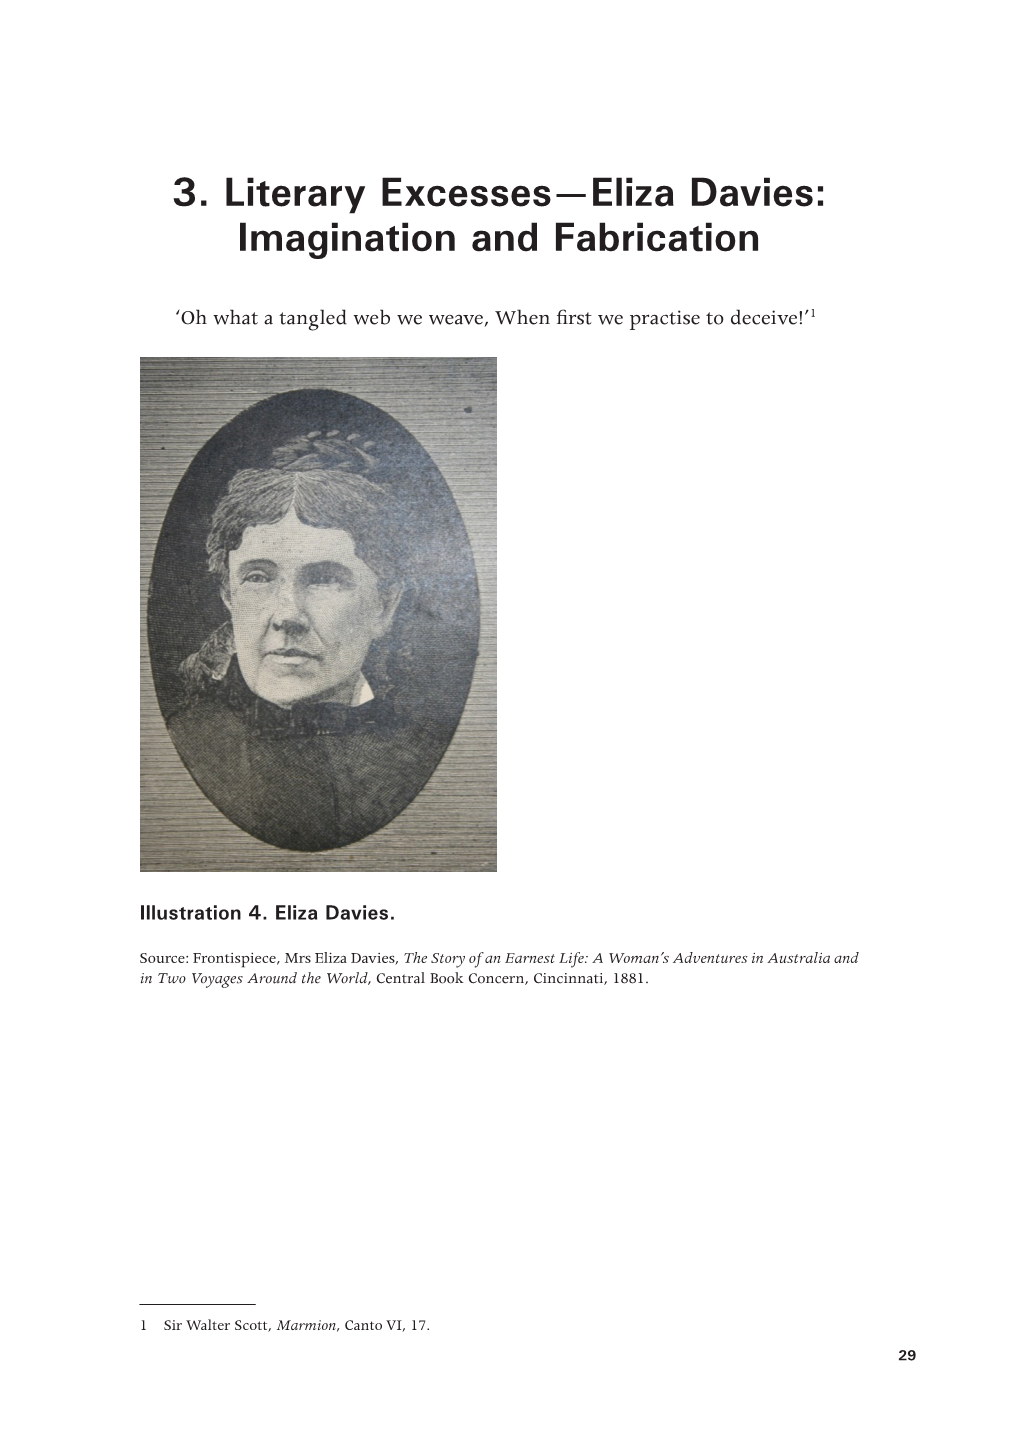 3. Literary Excesses—Eliza Davies: Imagination and Fabrication